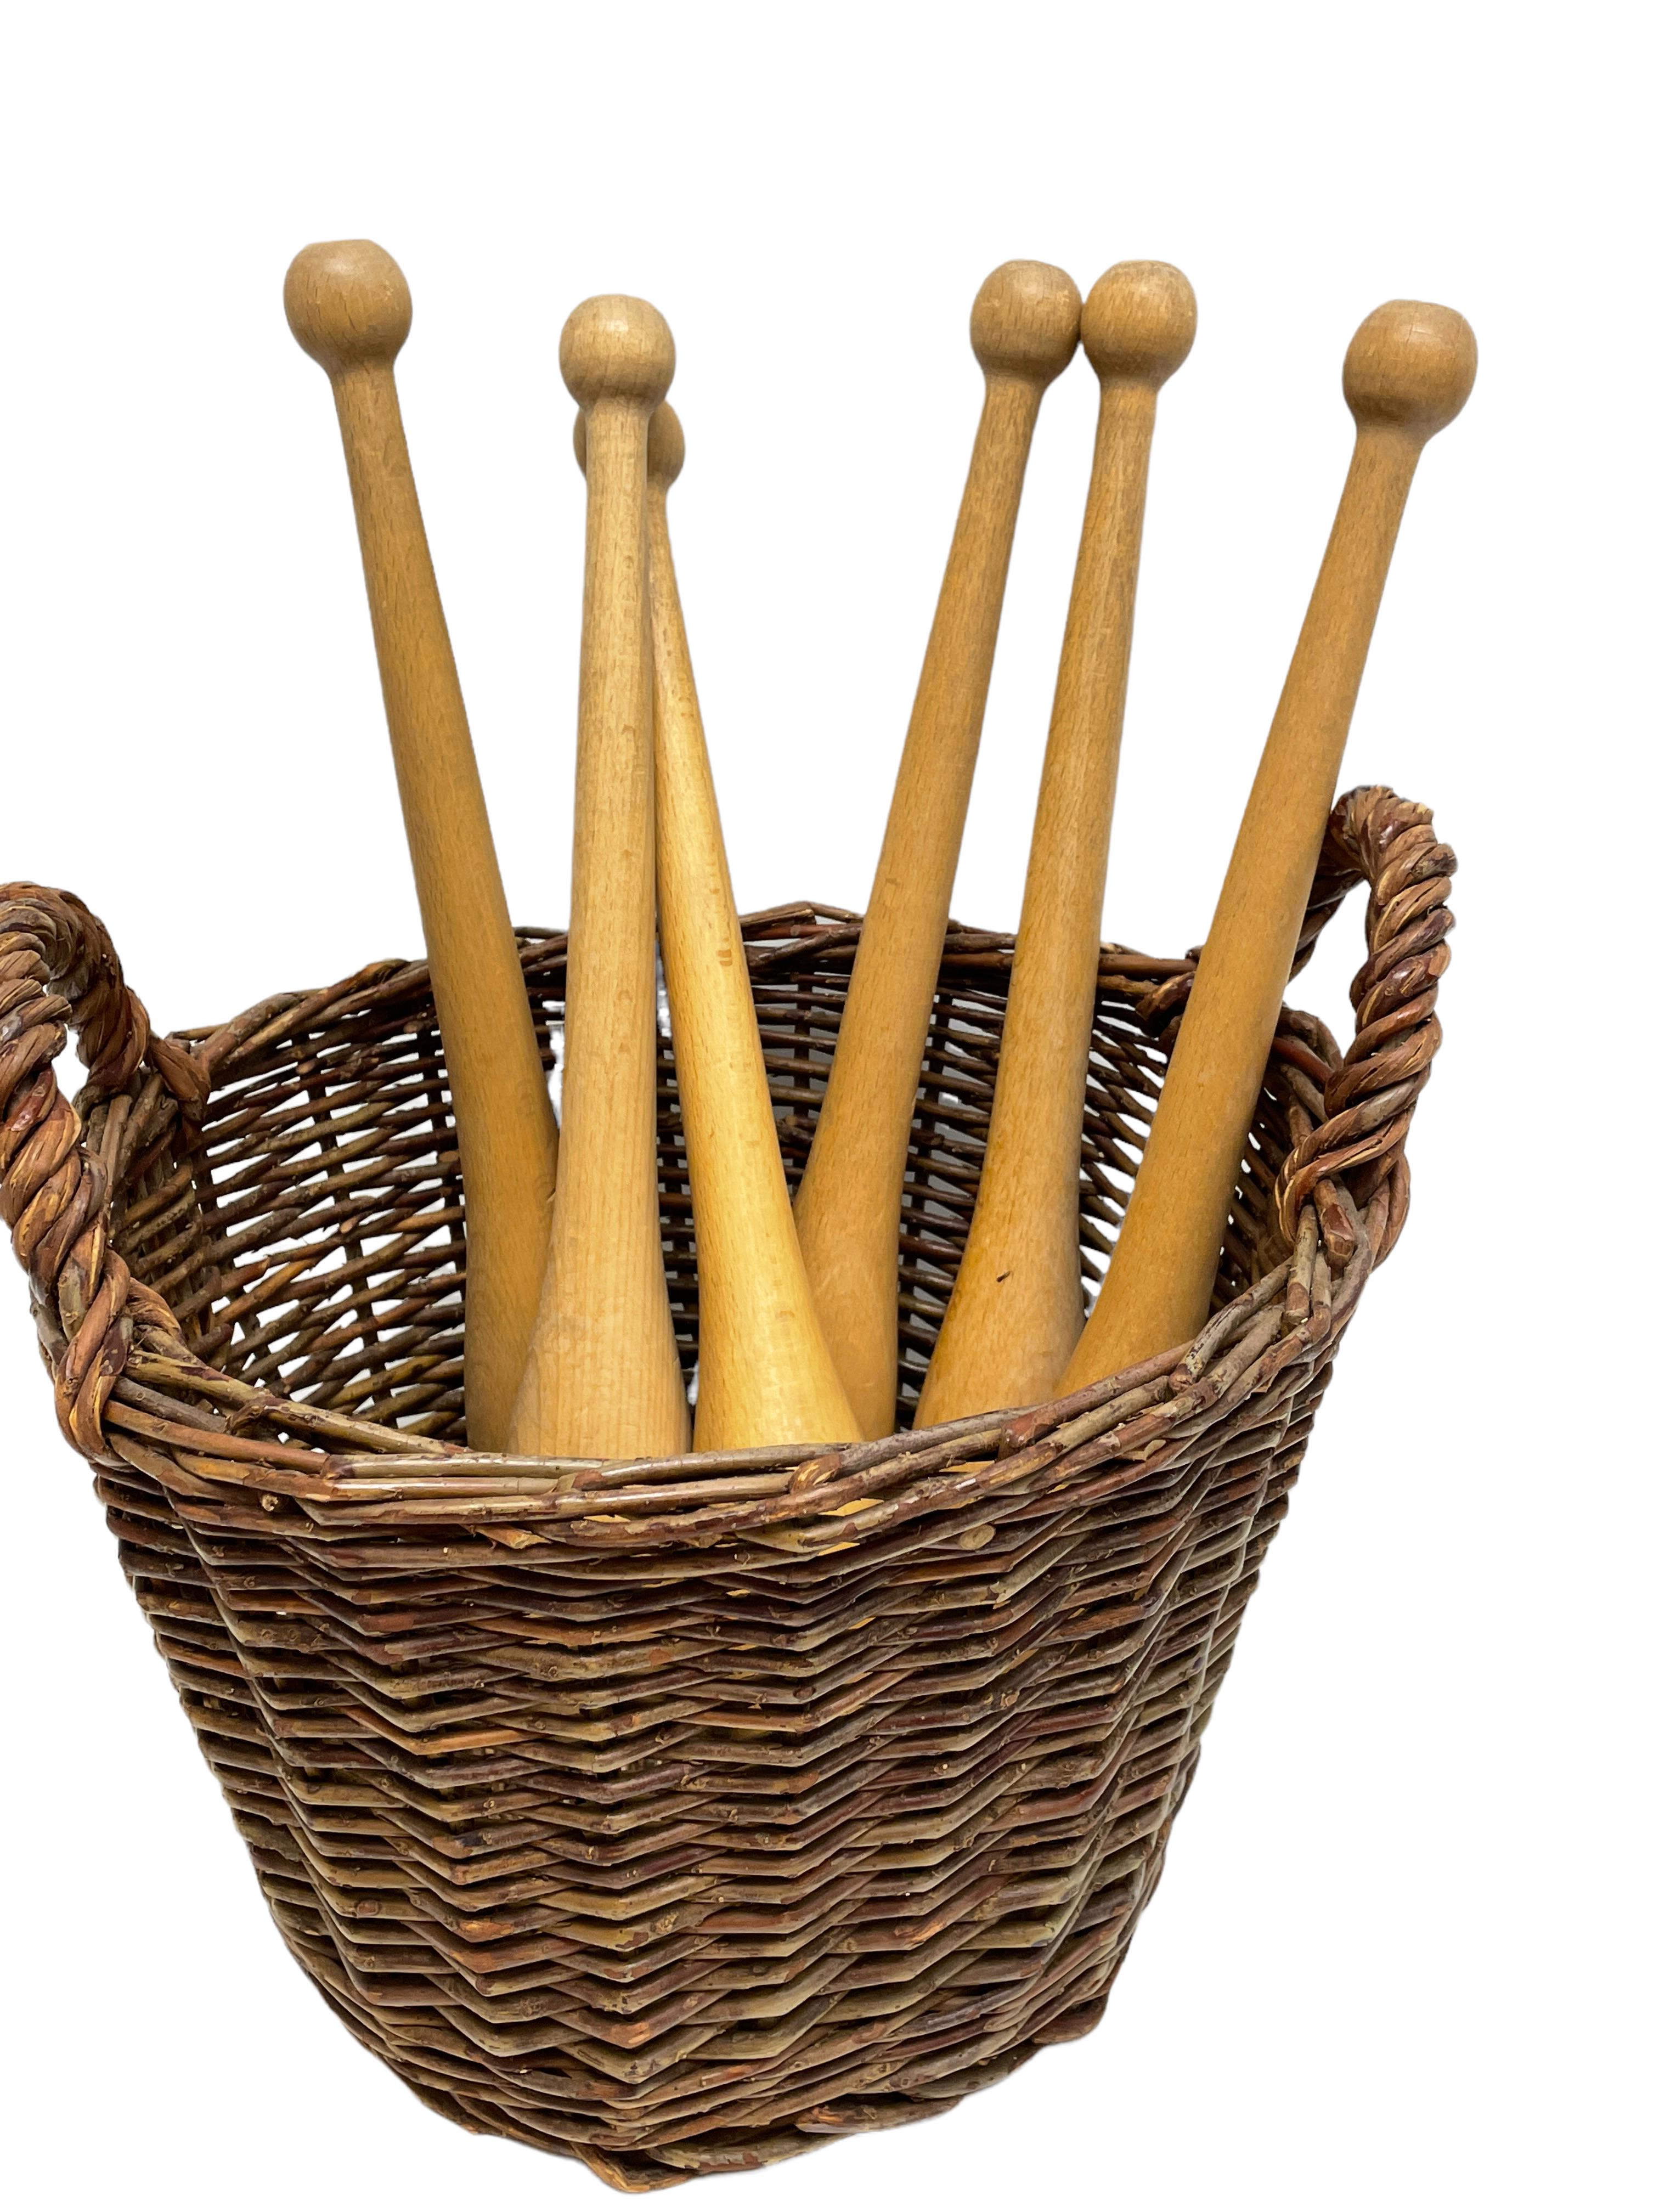 Set of Six wooden Gymnastic Clubs, with Storage Wicker Basket, Vintage German For Sale 1